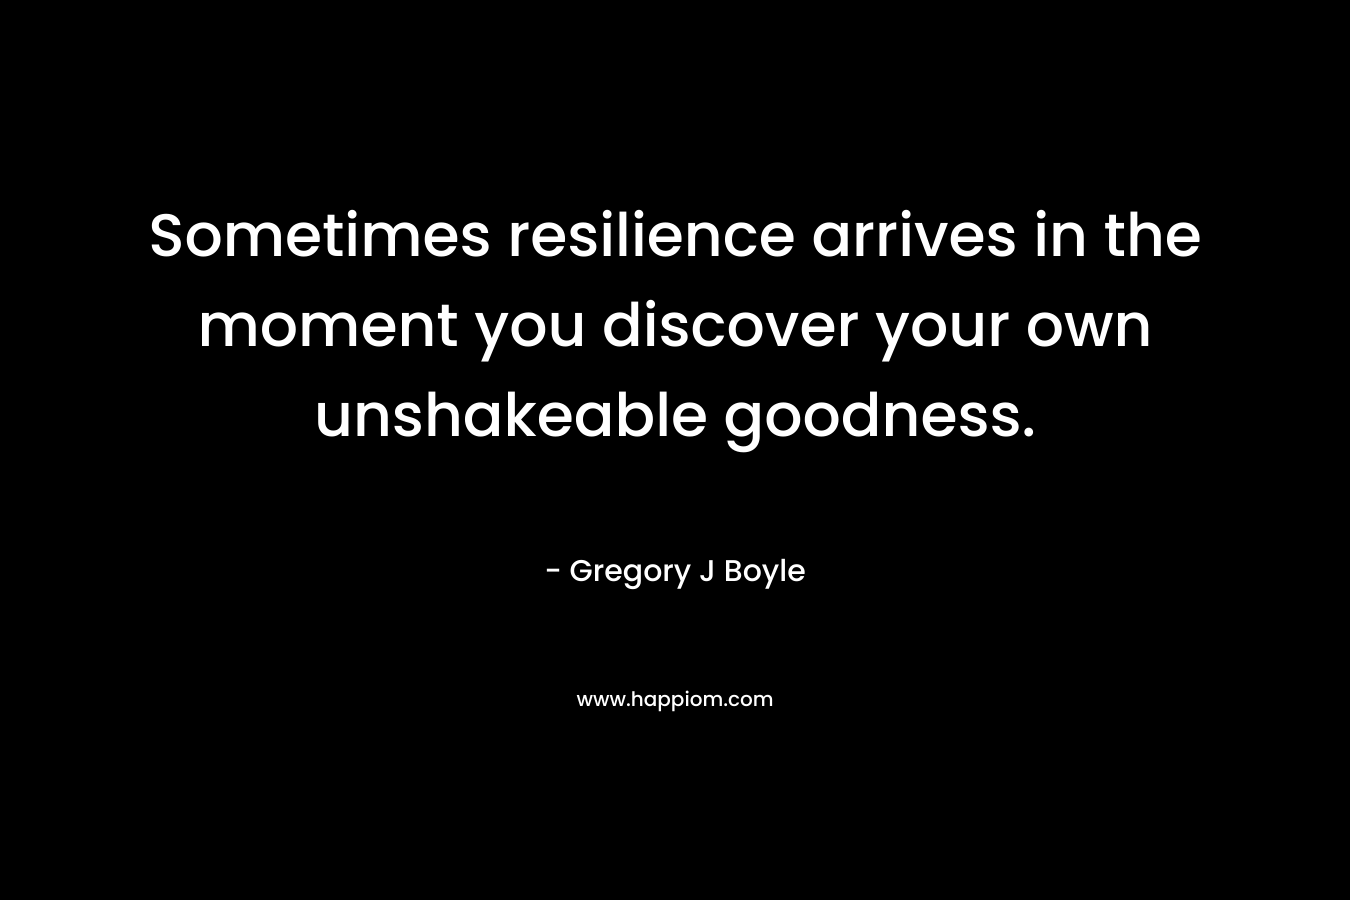 Sometimes resilience arrives in the moment you discover your own unshakeable goodness.